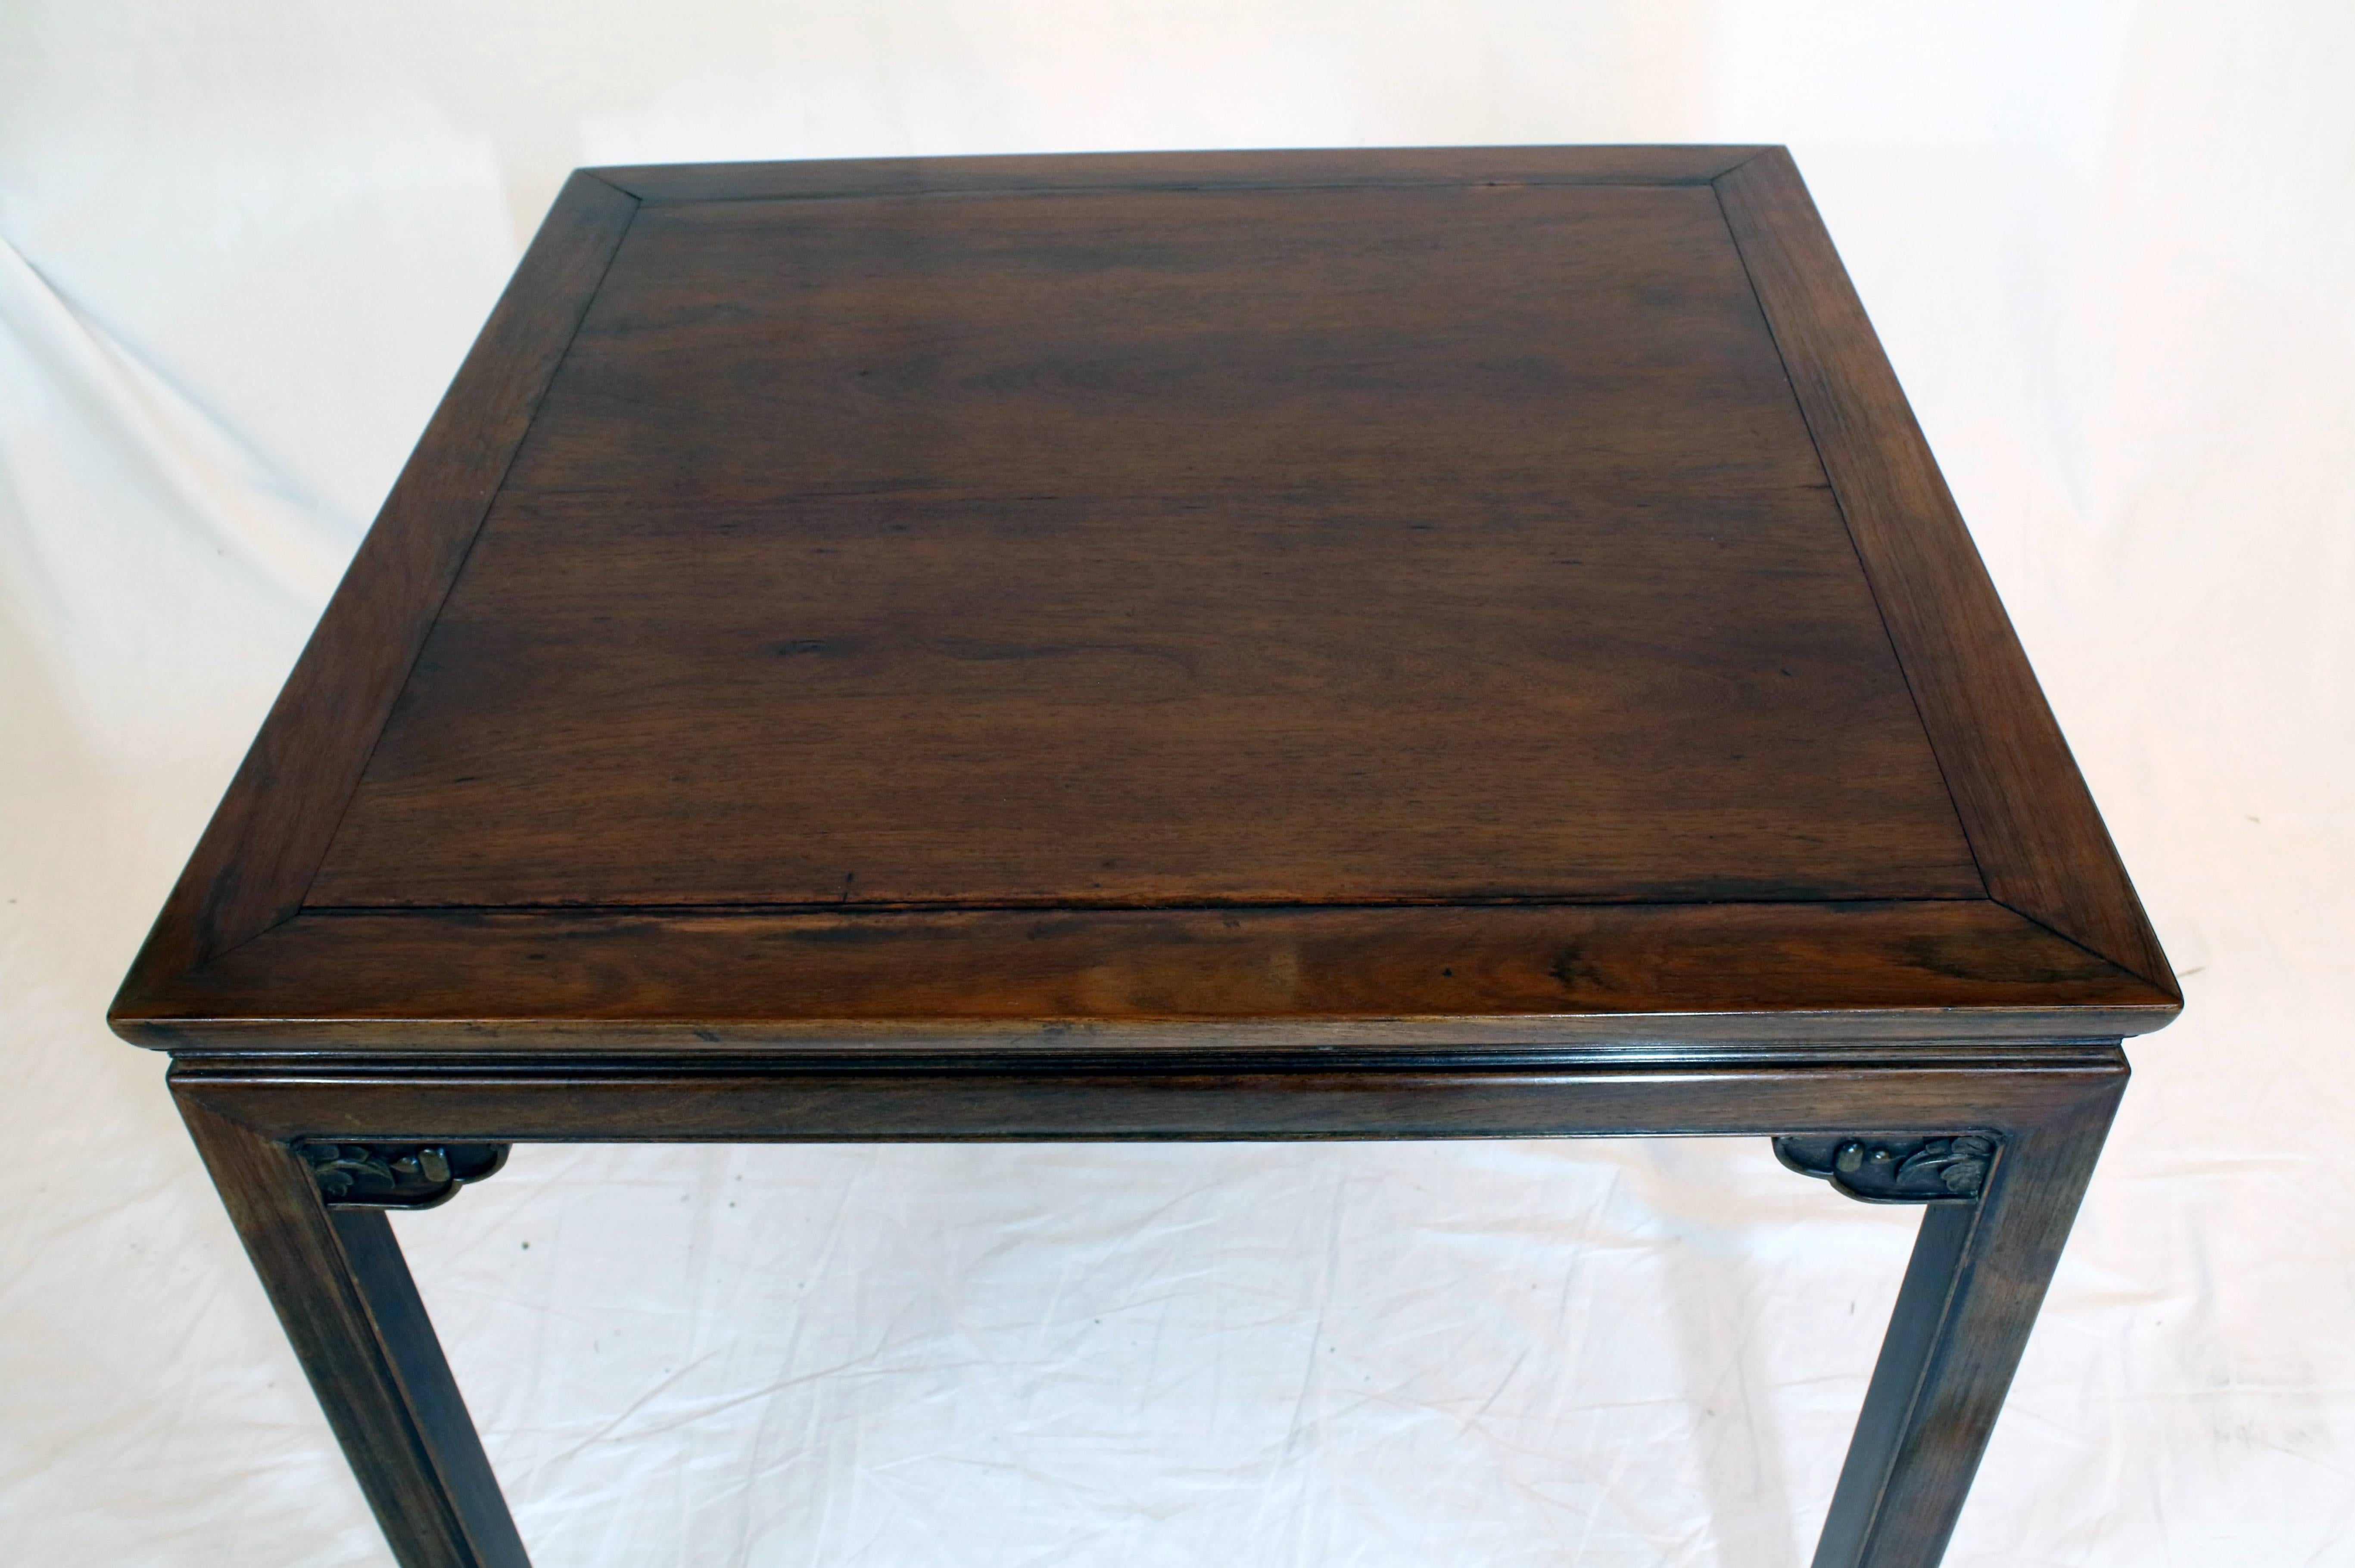 19th century game/mahjong table made from namu wood features a highly polished square top surface with hand-carved brackets which brace four minimal Marlborough legs that terminate in an Oriental scroll. The table is handcrafted and structured with